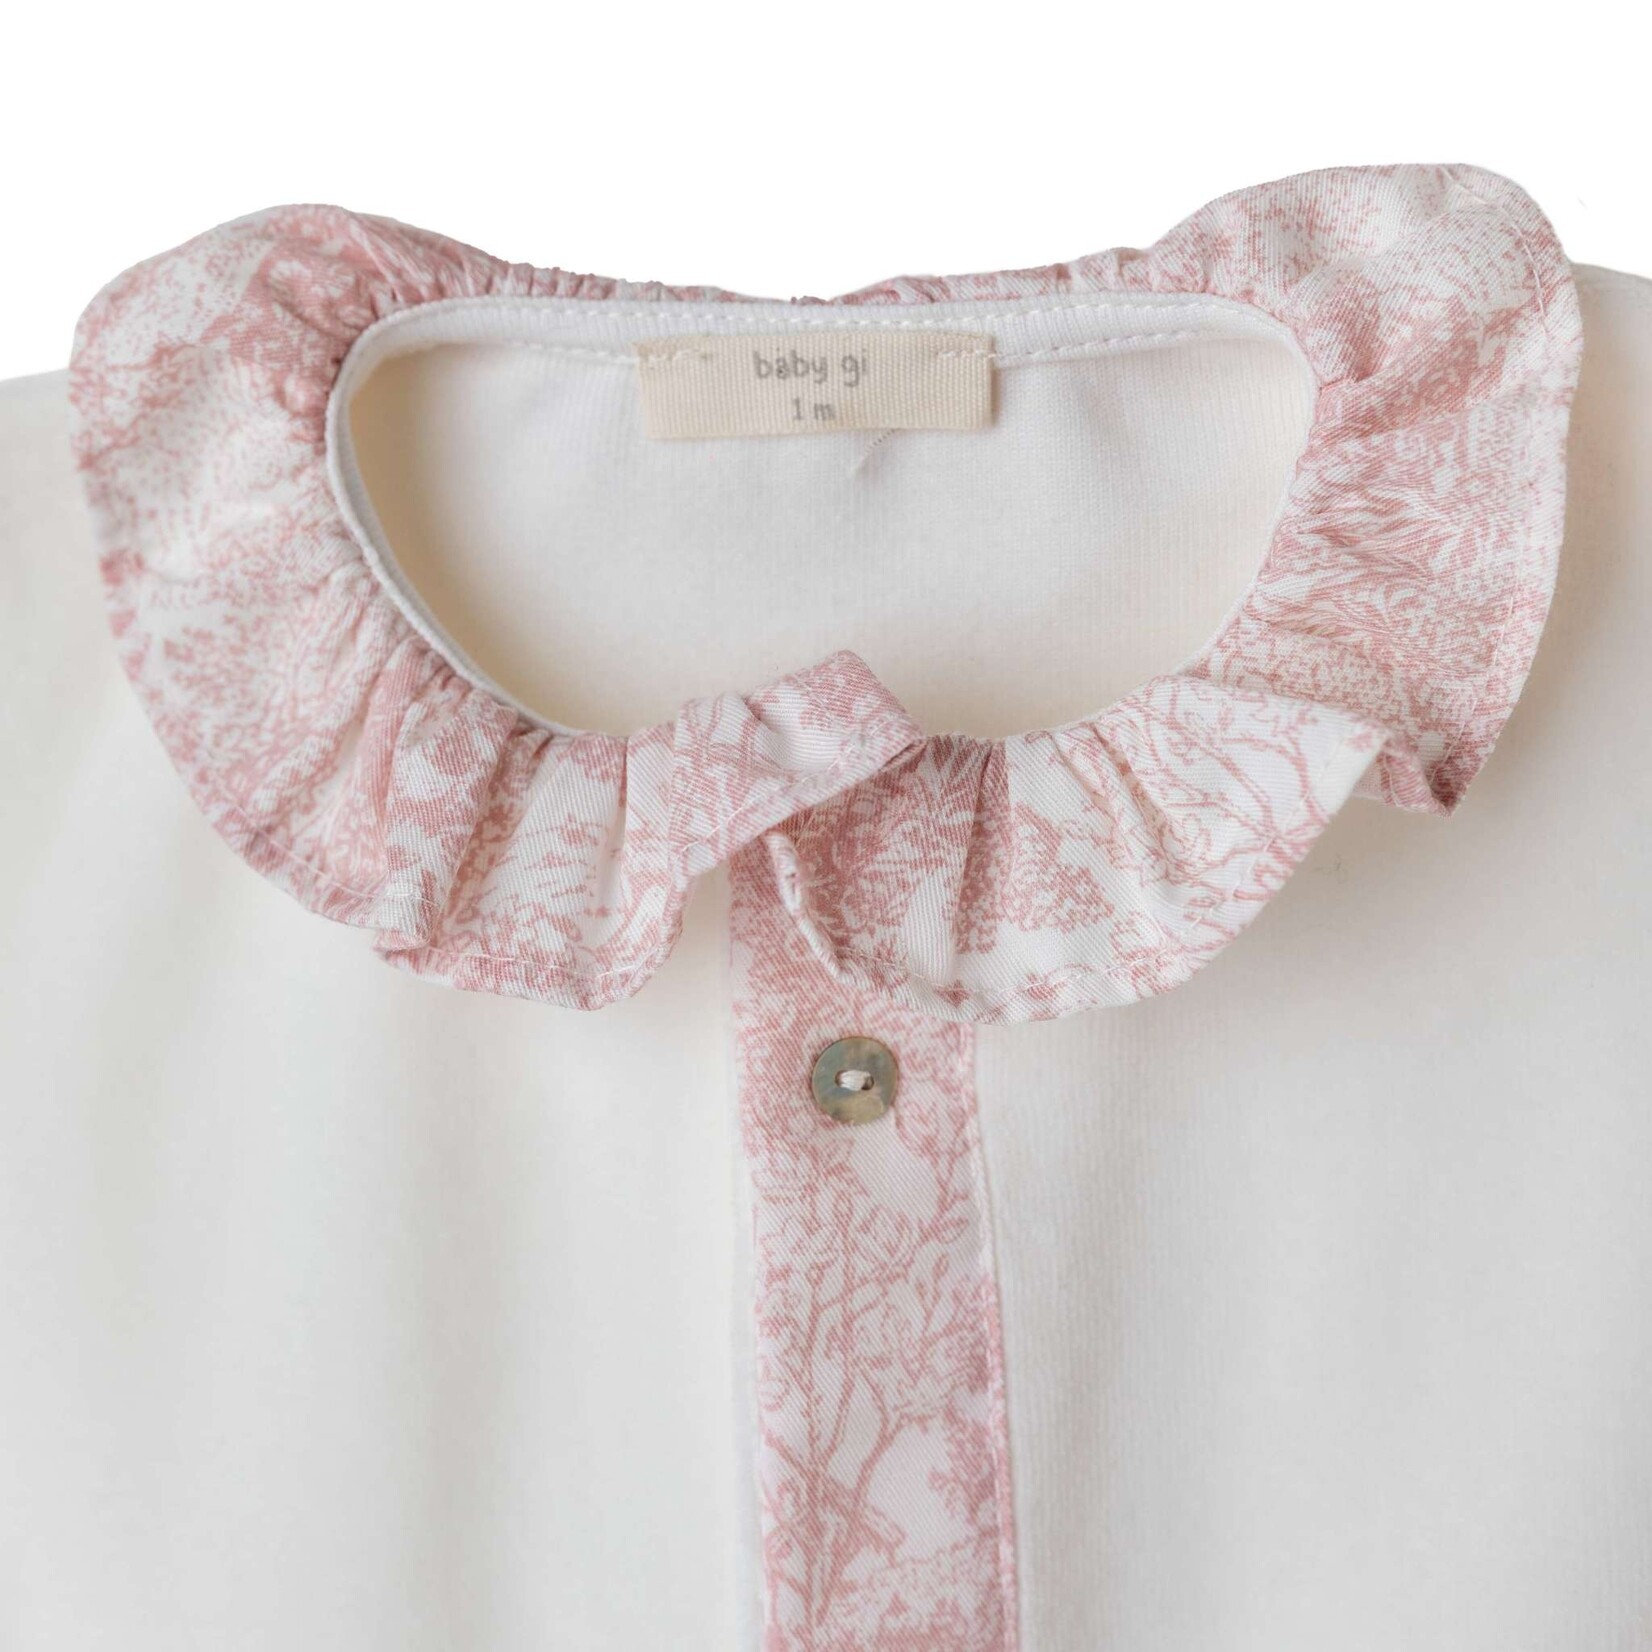 Baby Gi Baby Gi - Ivory babygrow with front row buttons - Aurora